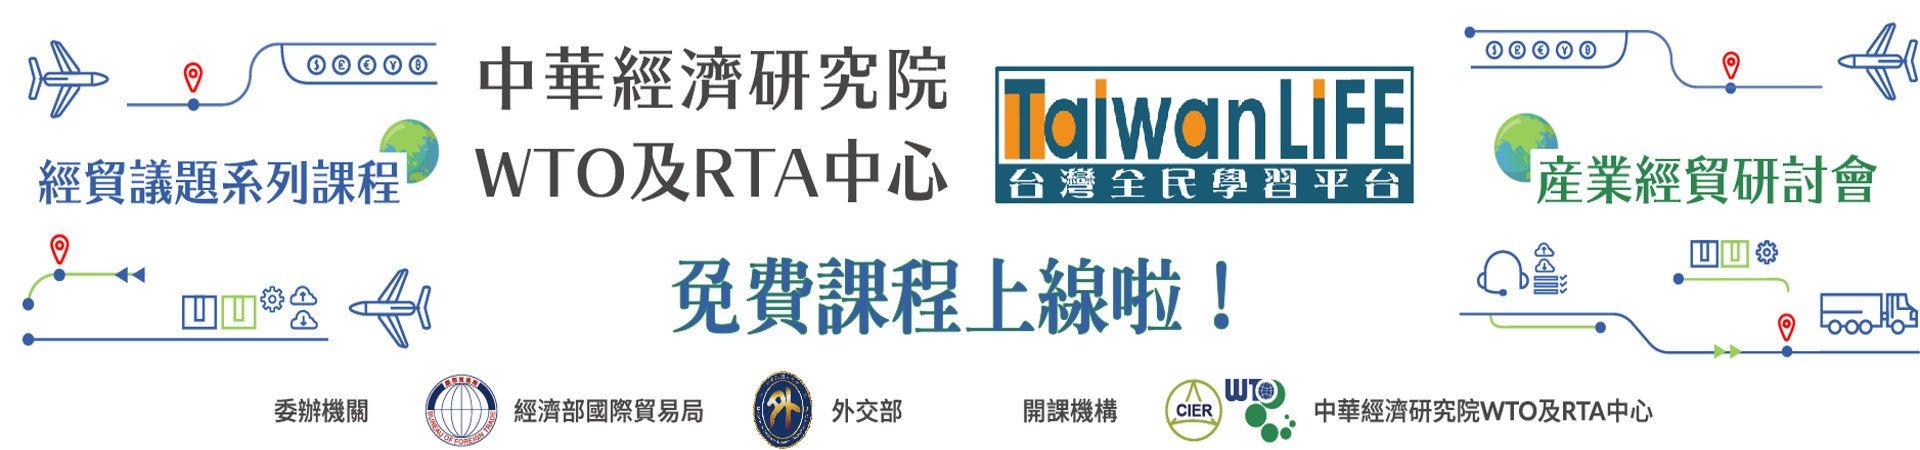 https://taiwanlife.org/local/enterprise/generalcourse.php?id=67